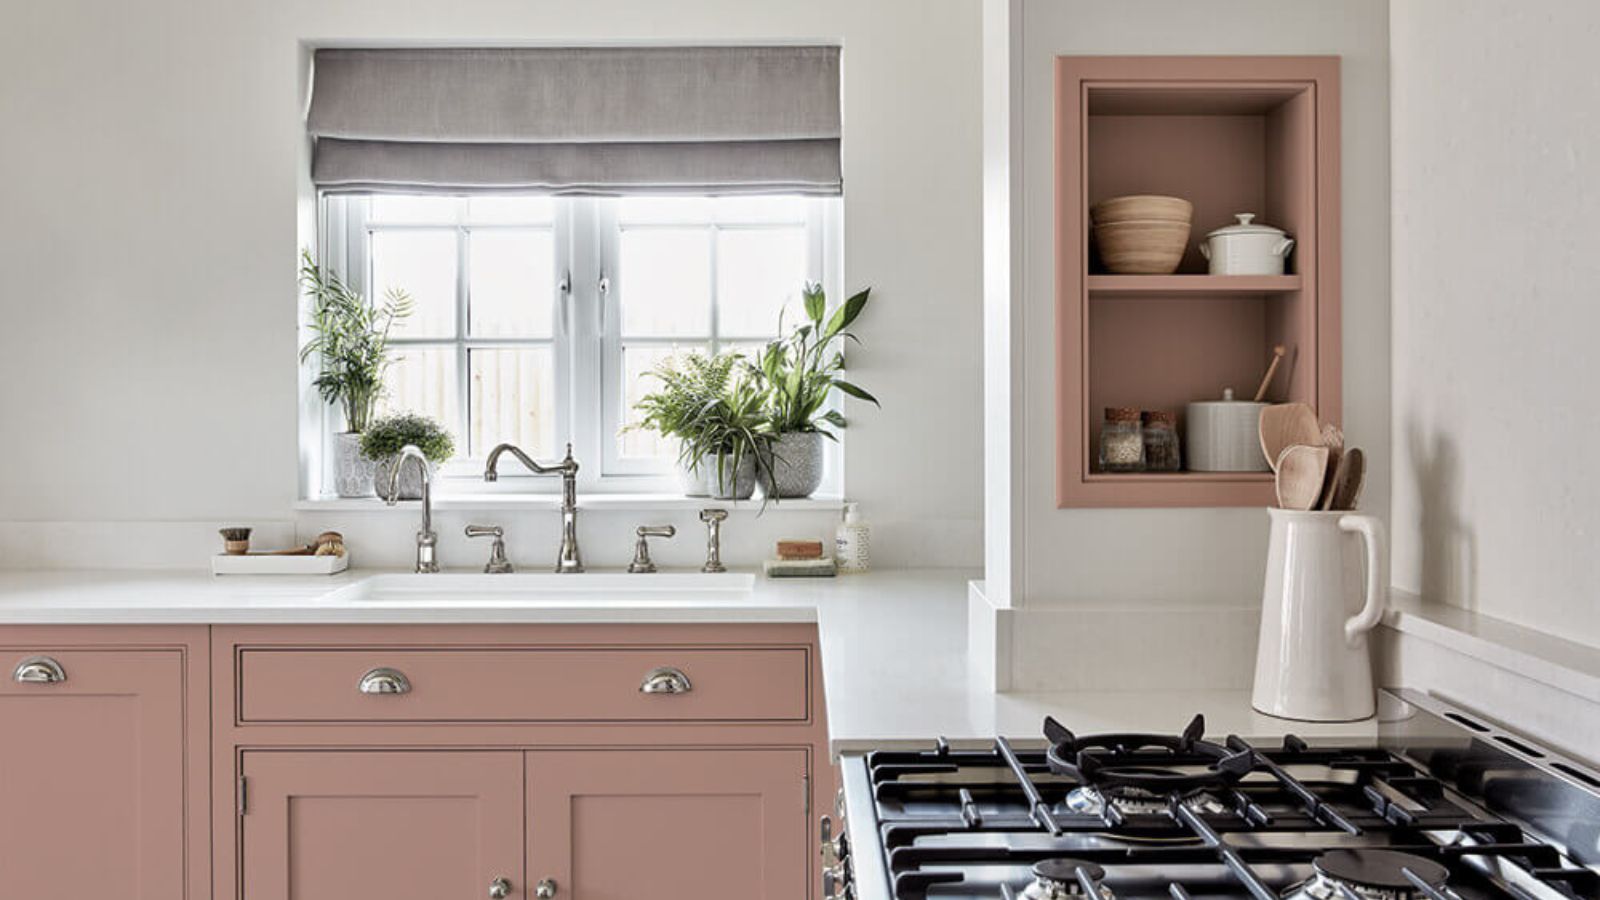 Keeping your kitchen counters organized doesn't mean tucking